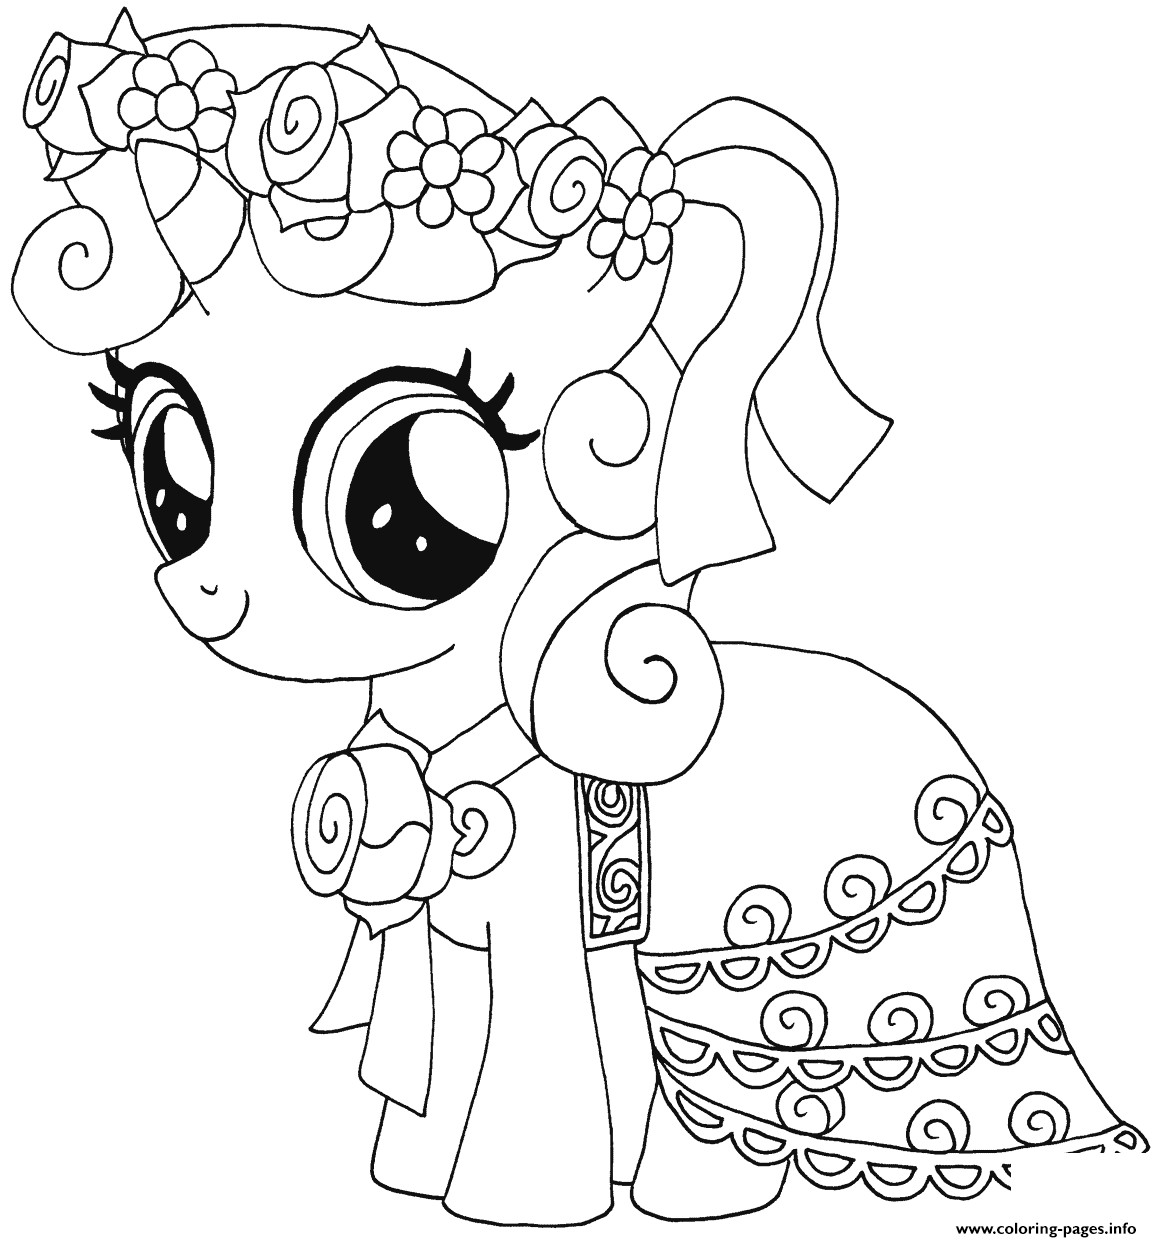 Coloring Sheets For Girls Mlp
 Sweetie Belle My Little Pony Coloring Pages Printable